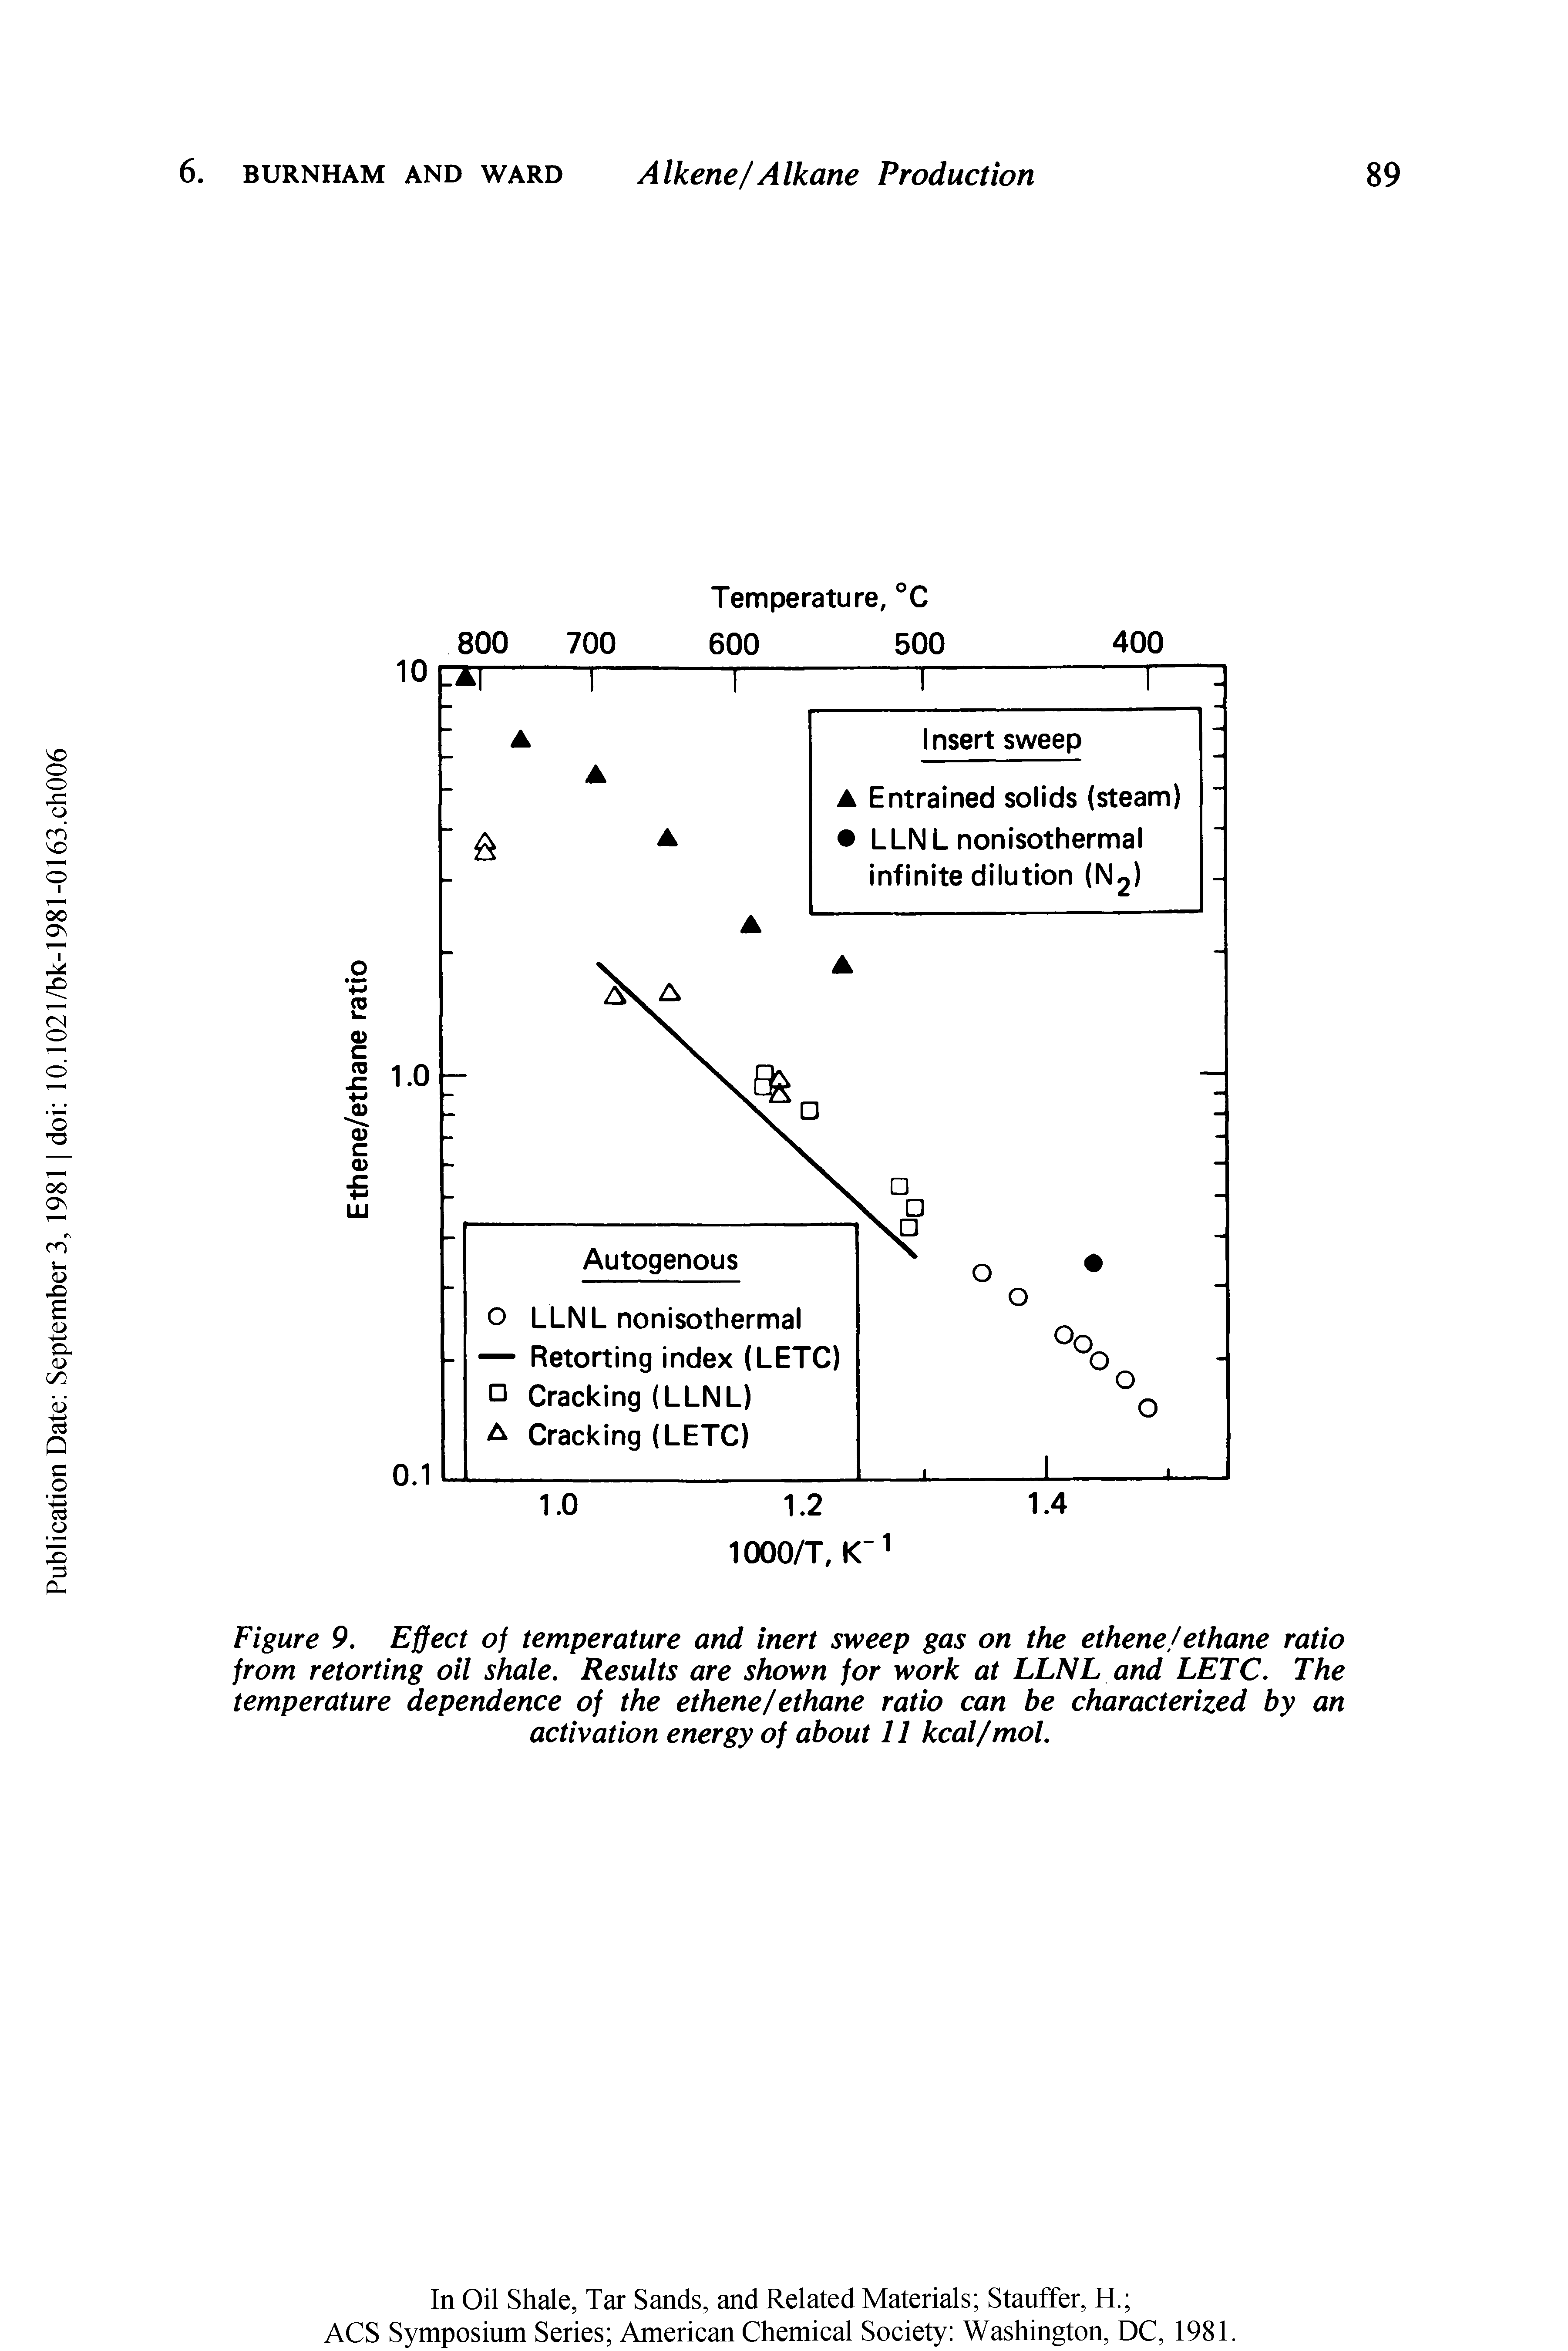 Figure 9. Effect of temperature and inert sweep gas on the ethene/ethane ratio from retorting oil shale. Results are shown for work at LLNL and LETC. The temperature dependence of the ethene/ethane ratio can be characterized by an activation energy of about 11 kcal/mol.